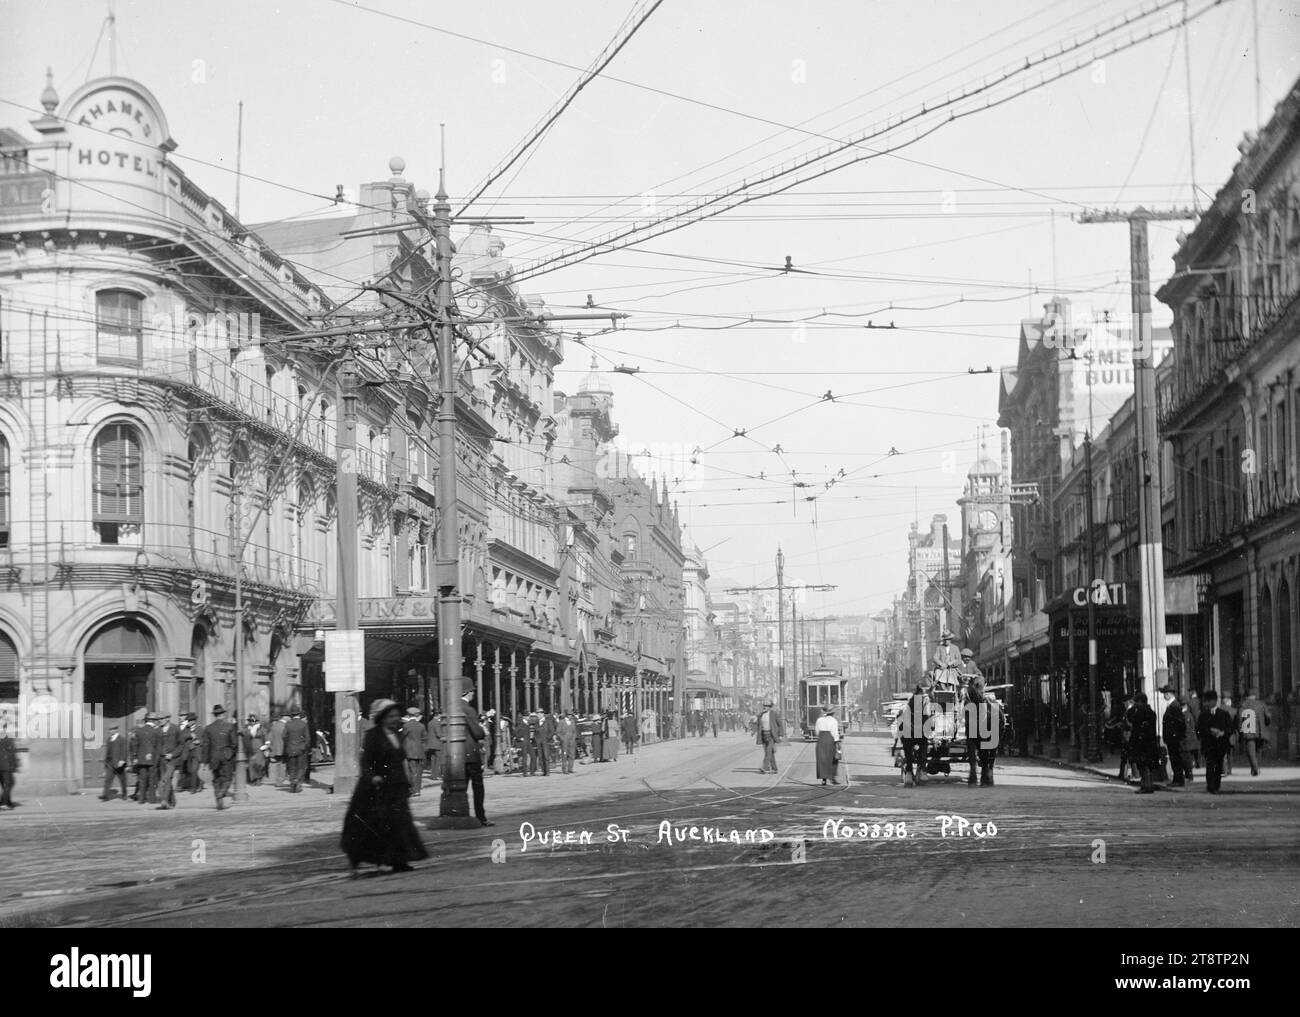 View looking up Queen Street from the Custom Street intersection, Auckland, New Zealand, View taken from the Customs Street intersection looking up Queen Street. On the lefthand side is the Thames Hotel with W Young & Co next door. In the foreground is a horse-drawn cart with a load of timber. A tram car with `Dominion Road' on the front can be seen in the middle distance, ca 1915-1920 Stock Photo